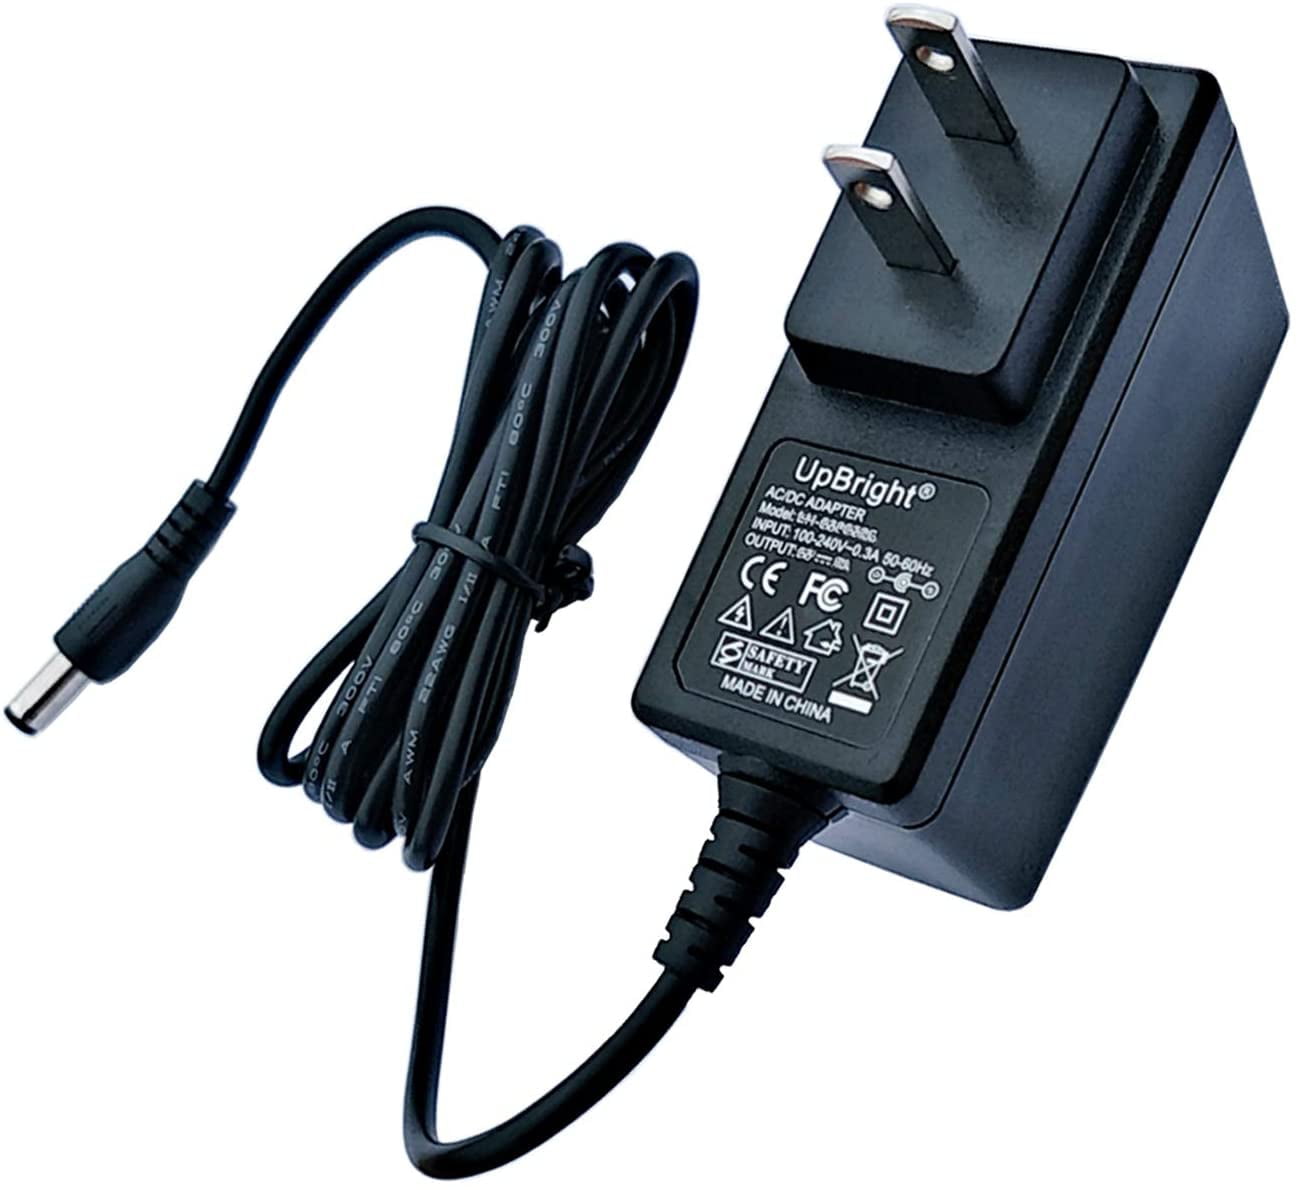 UPBRIGHT New 12V AC/DC Adapter Replacement for Kenwood W08-1273 W081273 JVC  Kenwood JVCKENWOOD KSC-25L Li ion Battery Rapid Charger Charging Cradle